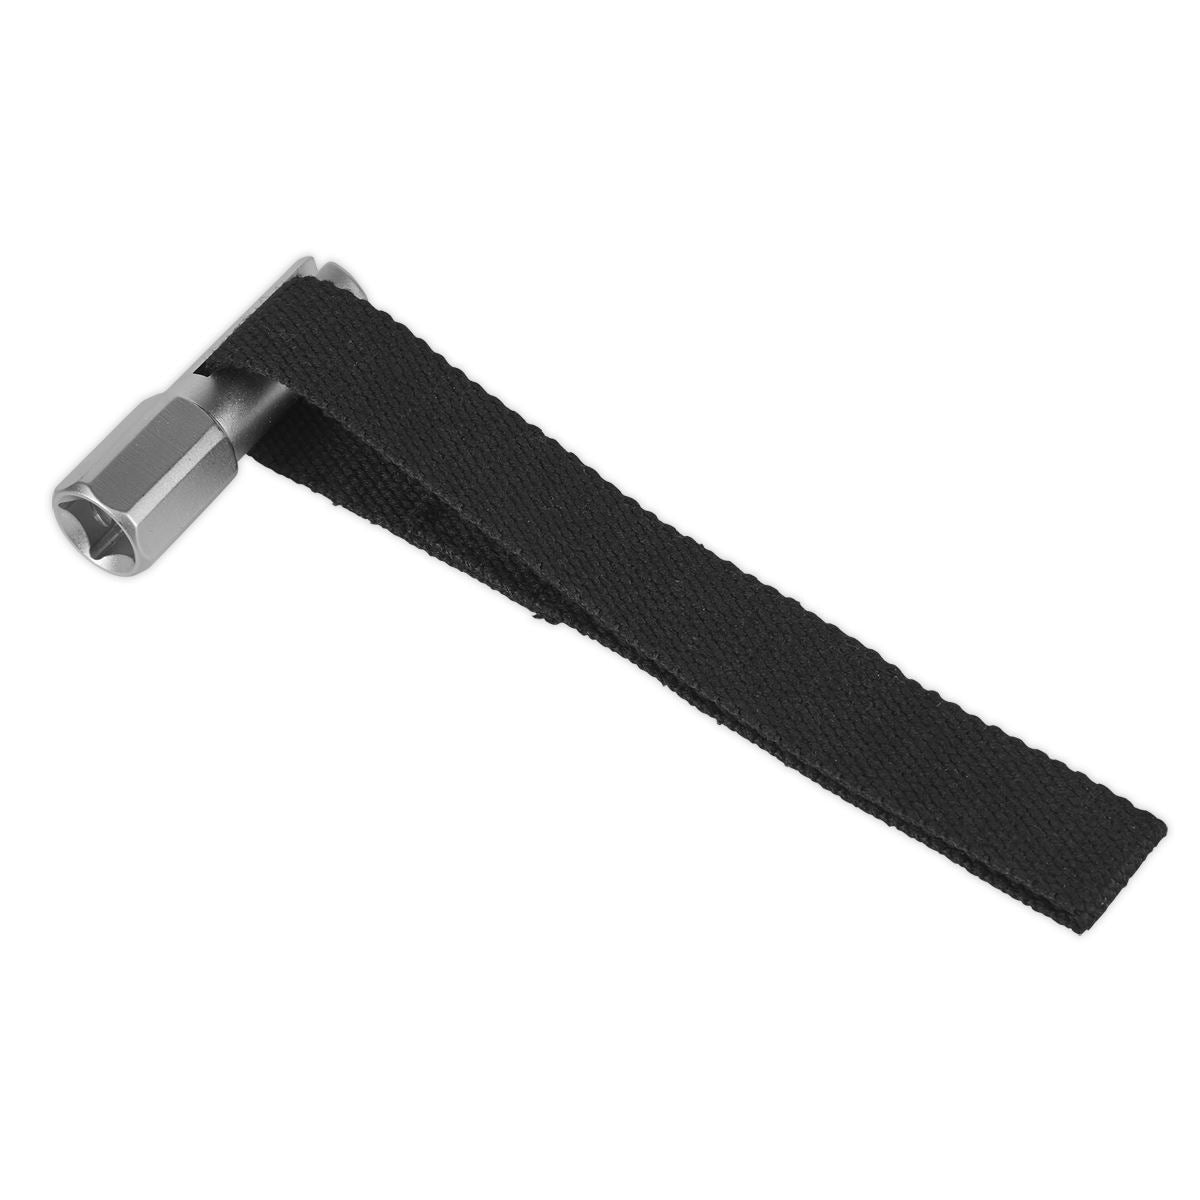 Sealey Oil Filter Strap Wrench 120mm Capacity 1/2"Sq Drive